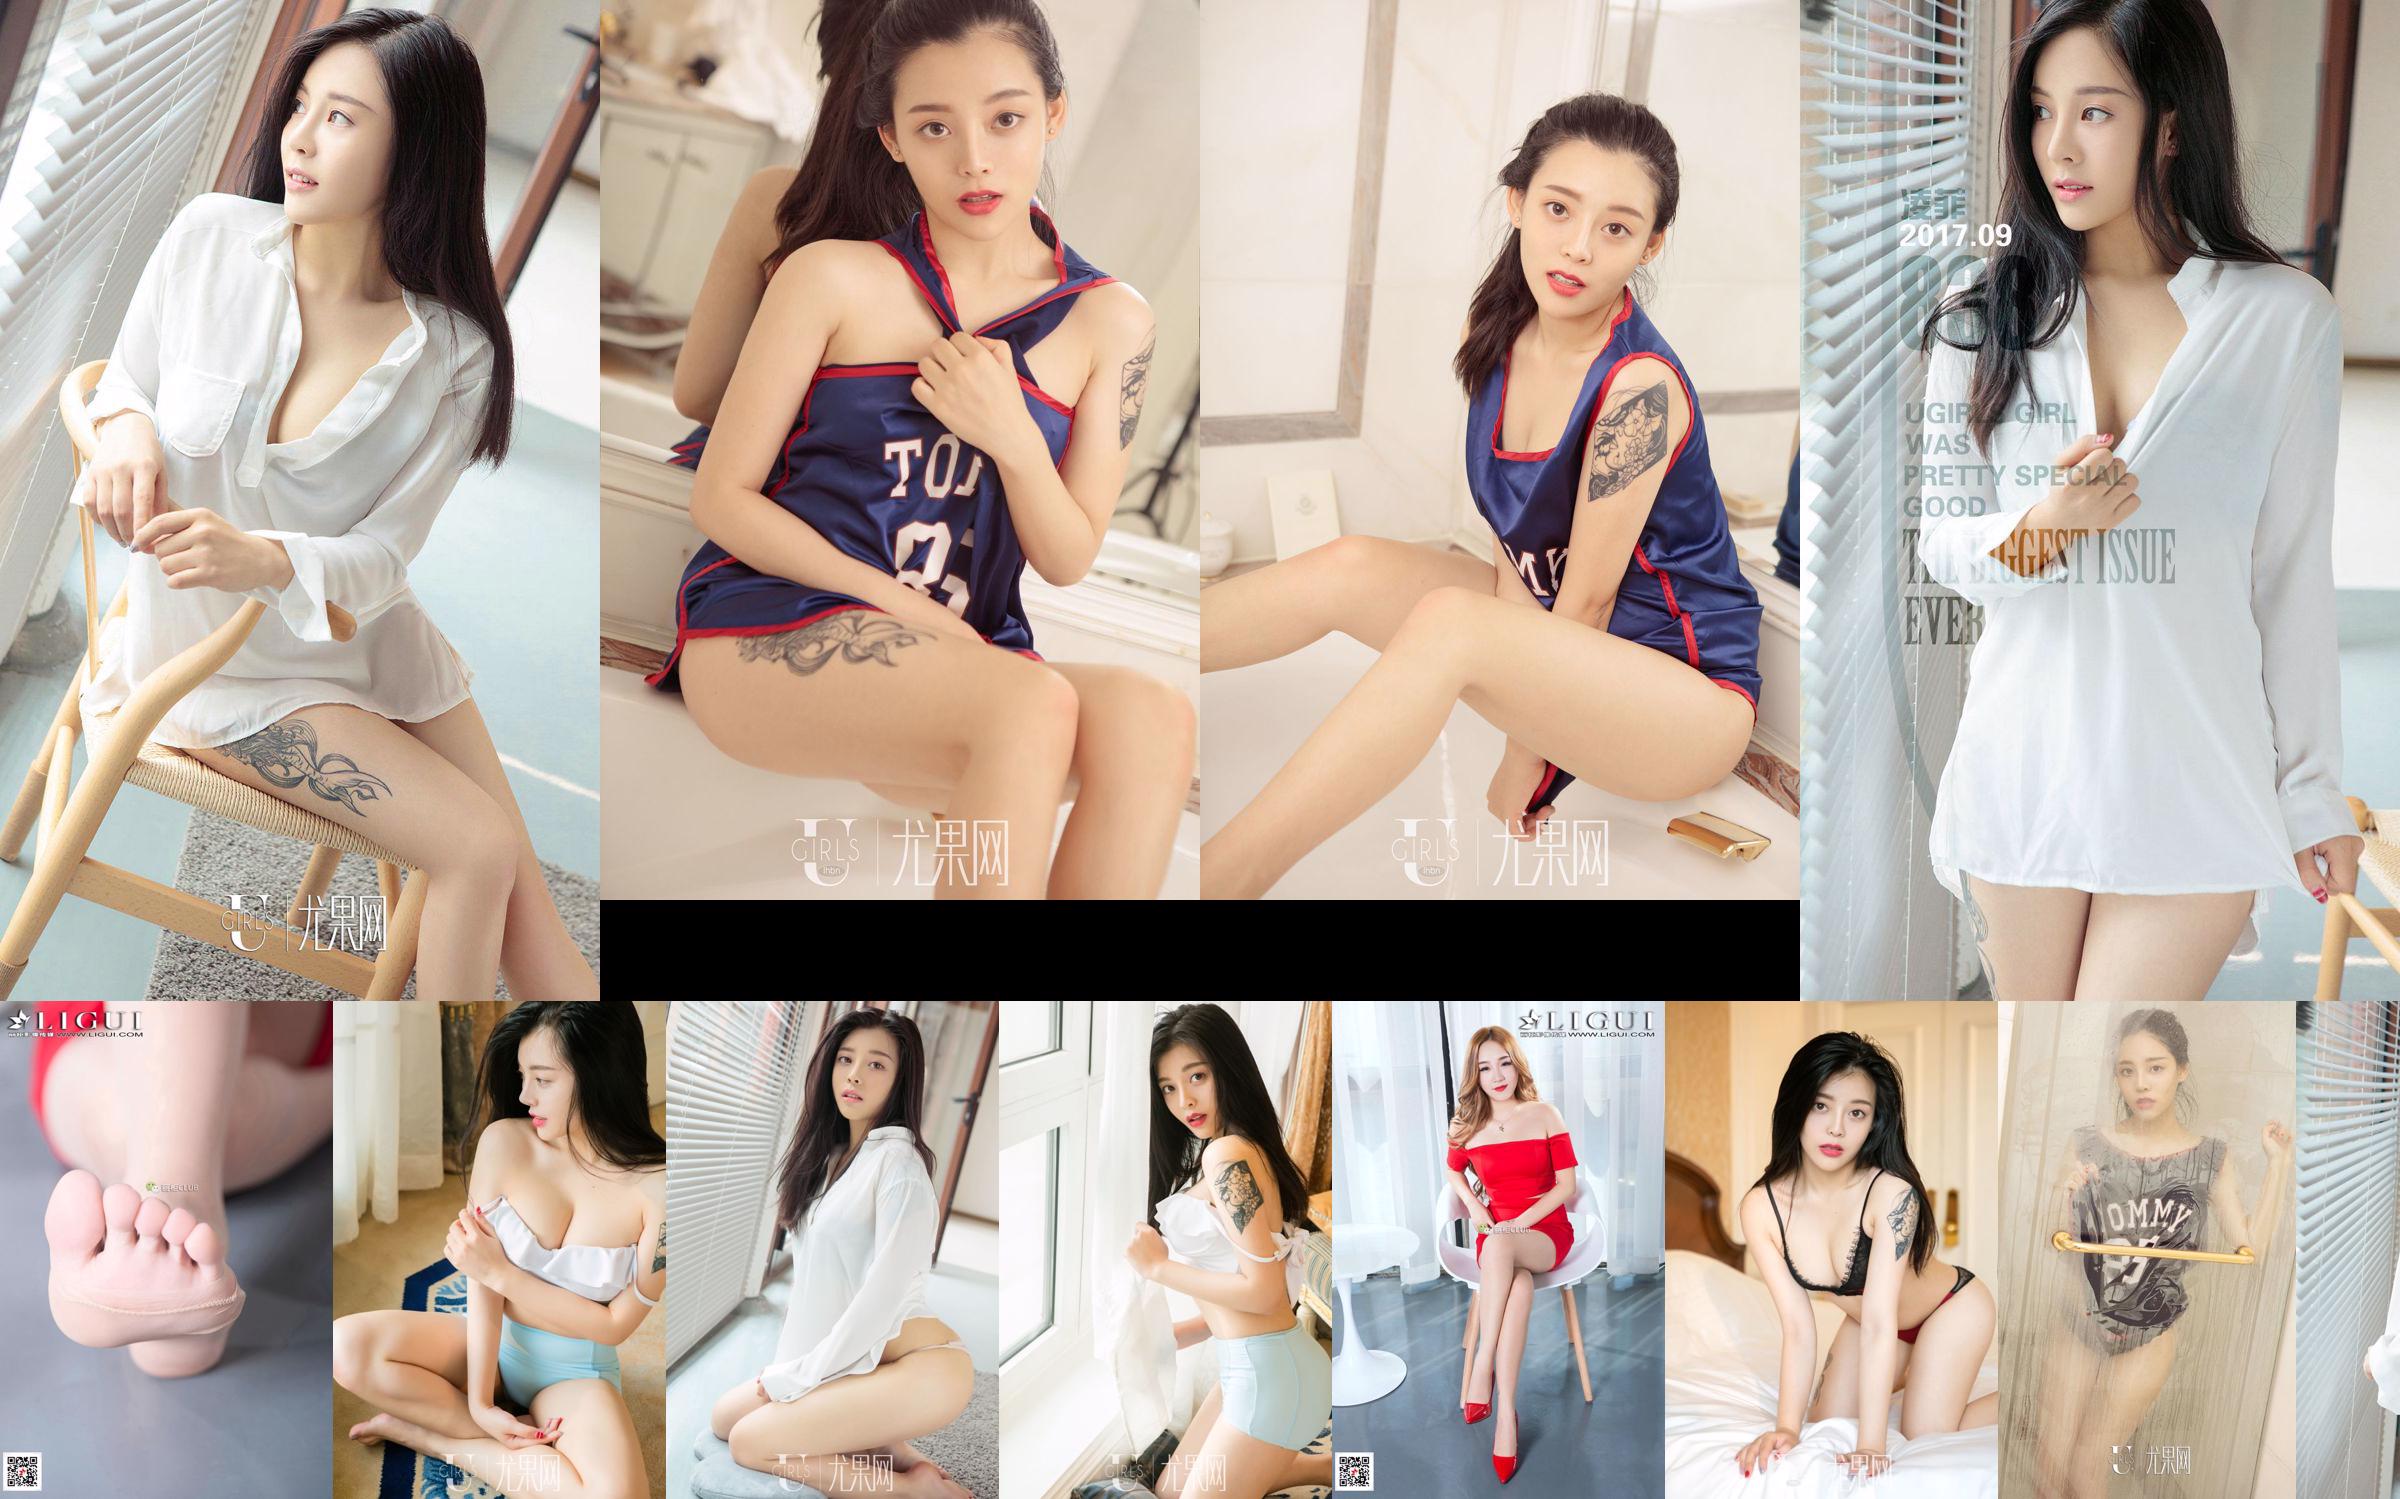 Ling Fei "Drenched Basketball Uniform" [Youguoquan] No.838 No.9bc367 หน้า 1